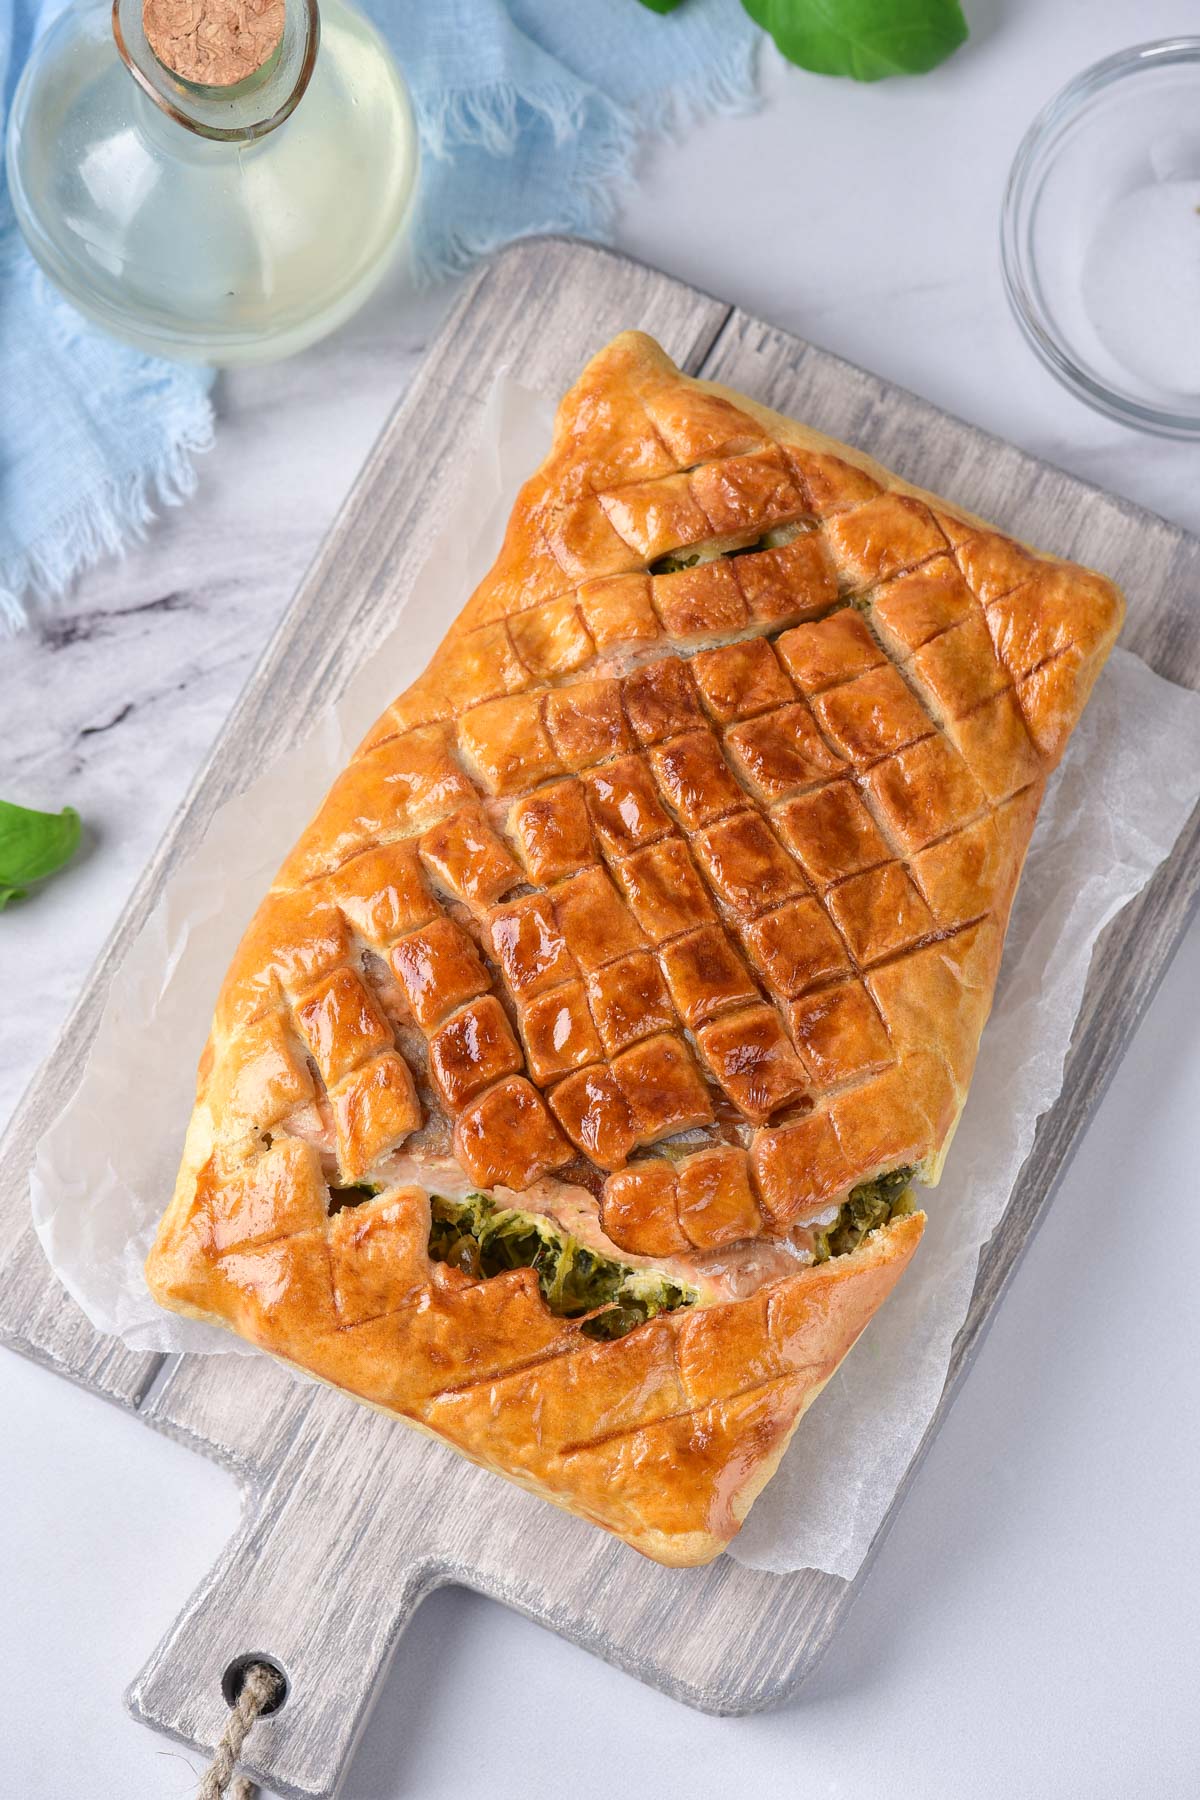 the completed salmon wellington recipe